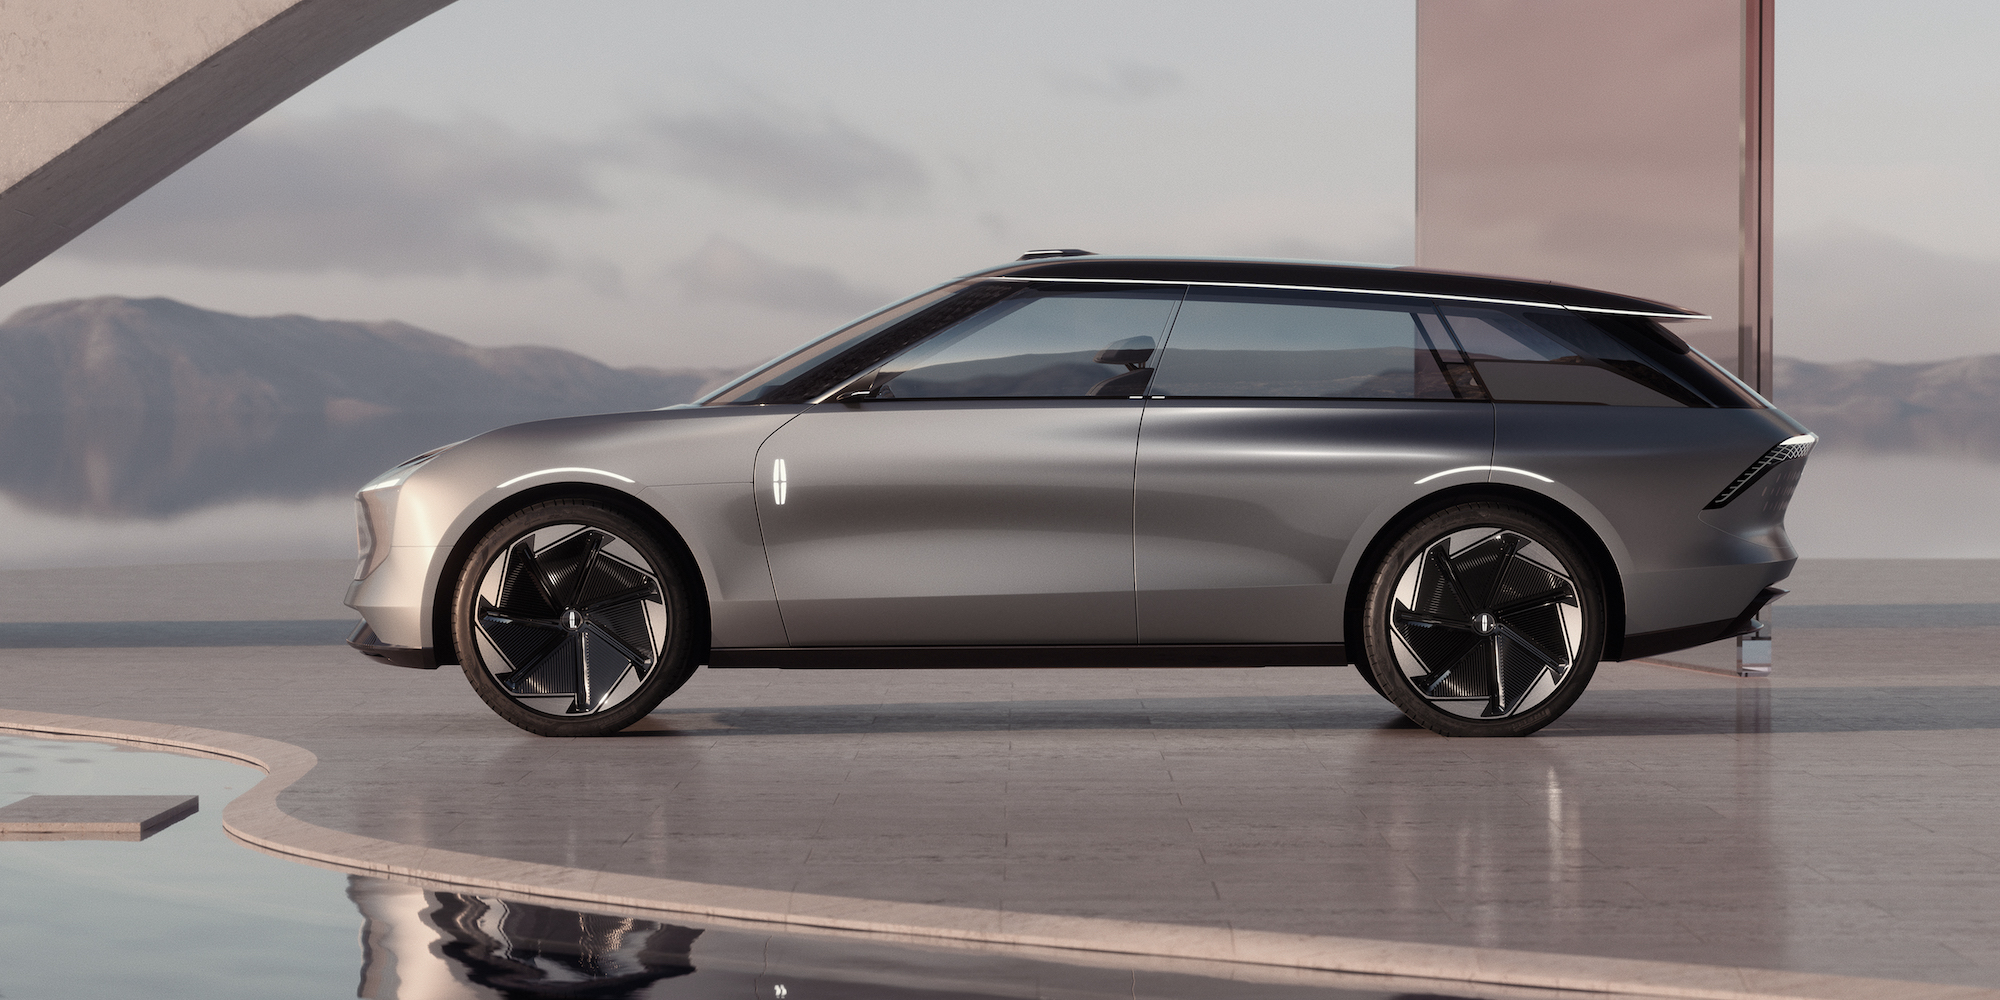 Lincoln Star Concept: Could a sport tourer be in Lincoln's electric future?